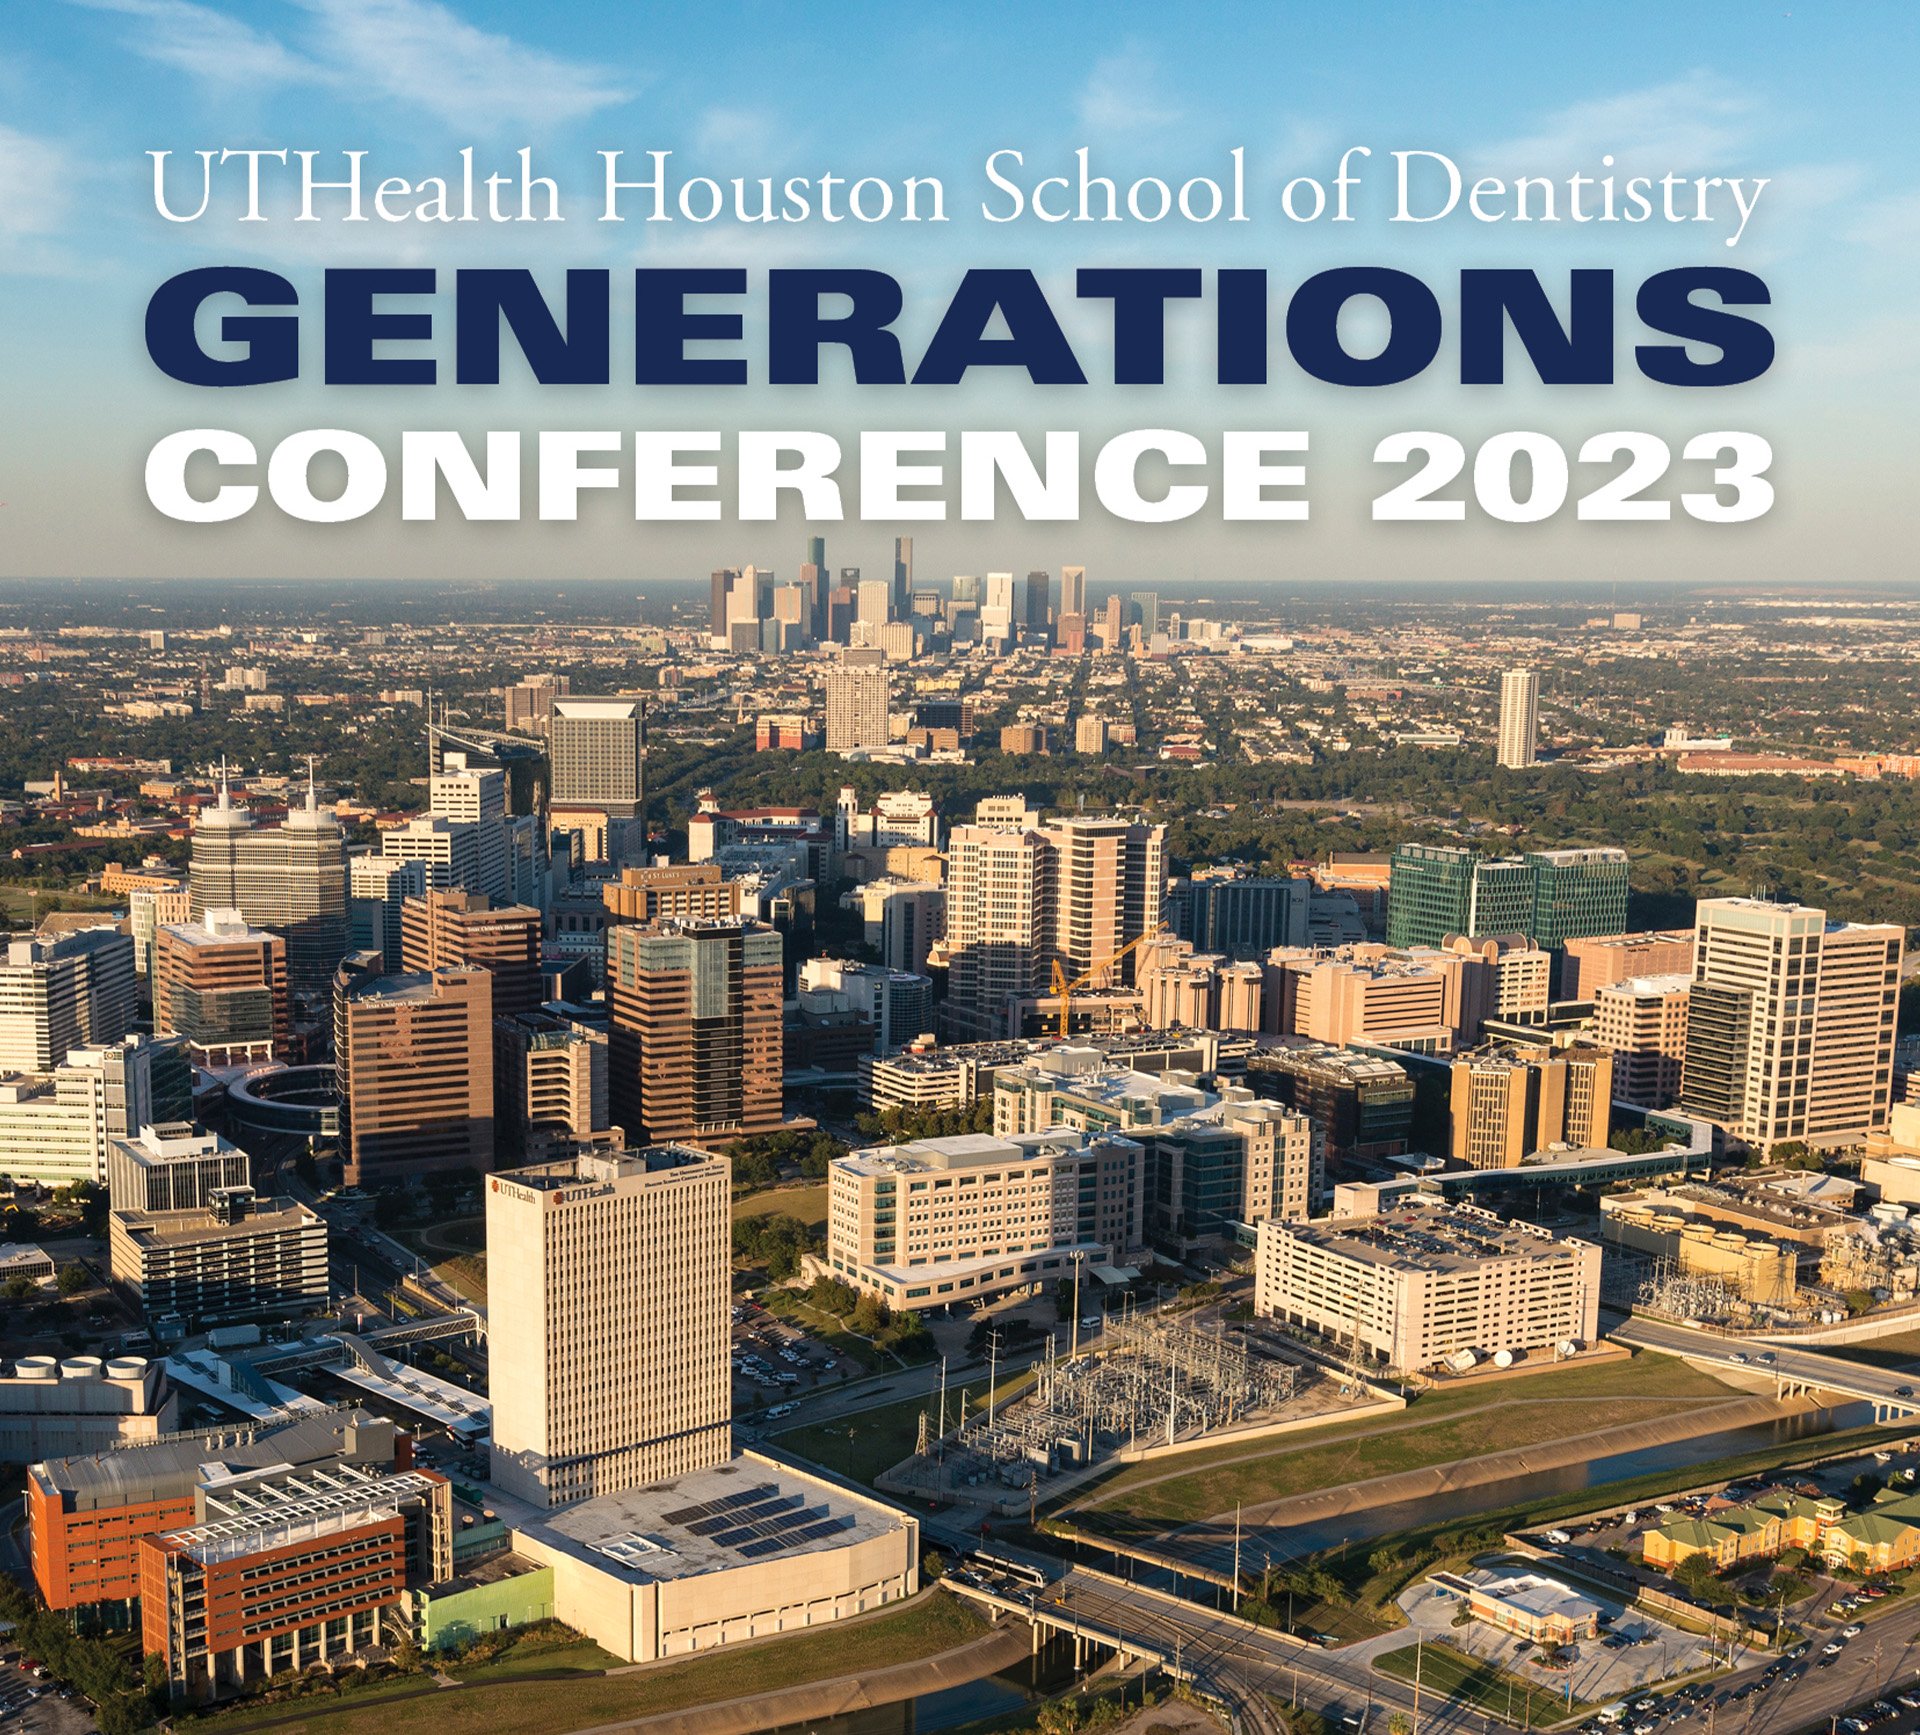 Generations Conference 2023 will be held on Friday, Sept. 8, at UTHealth Houston School of Dentistry.